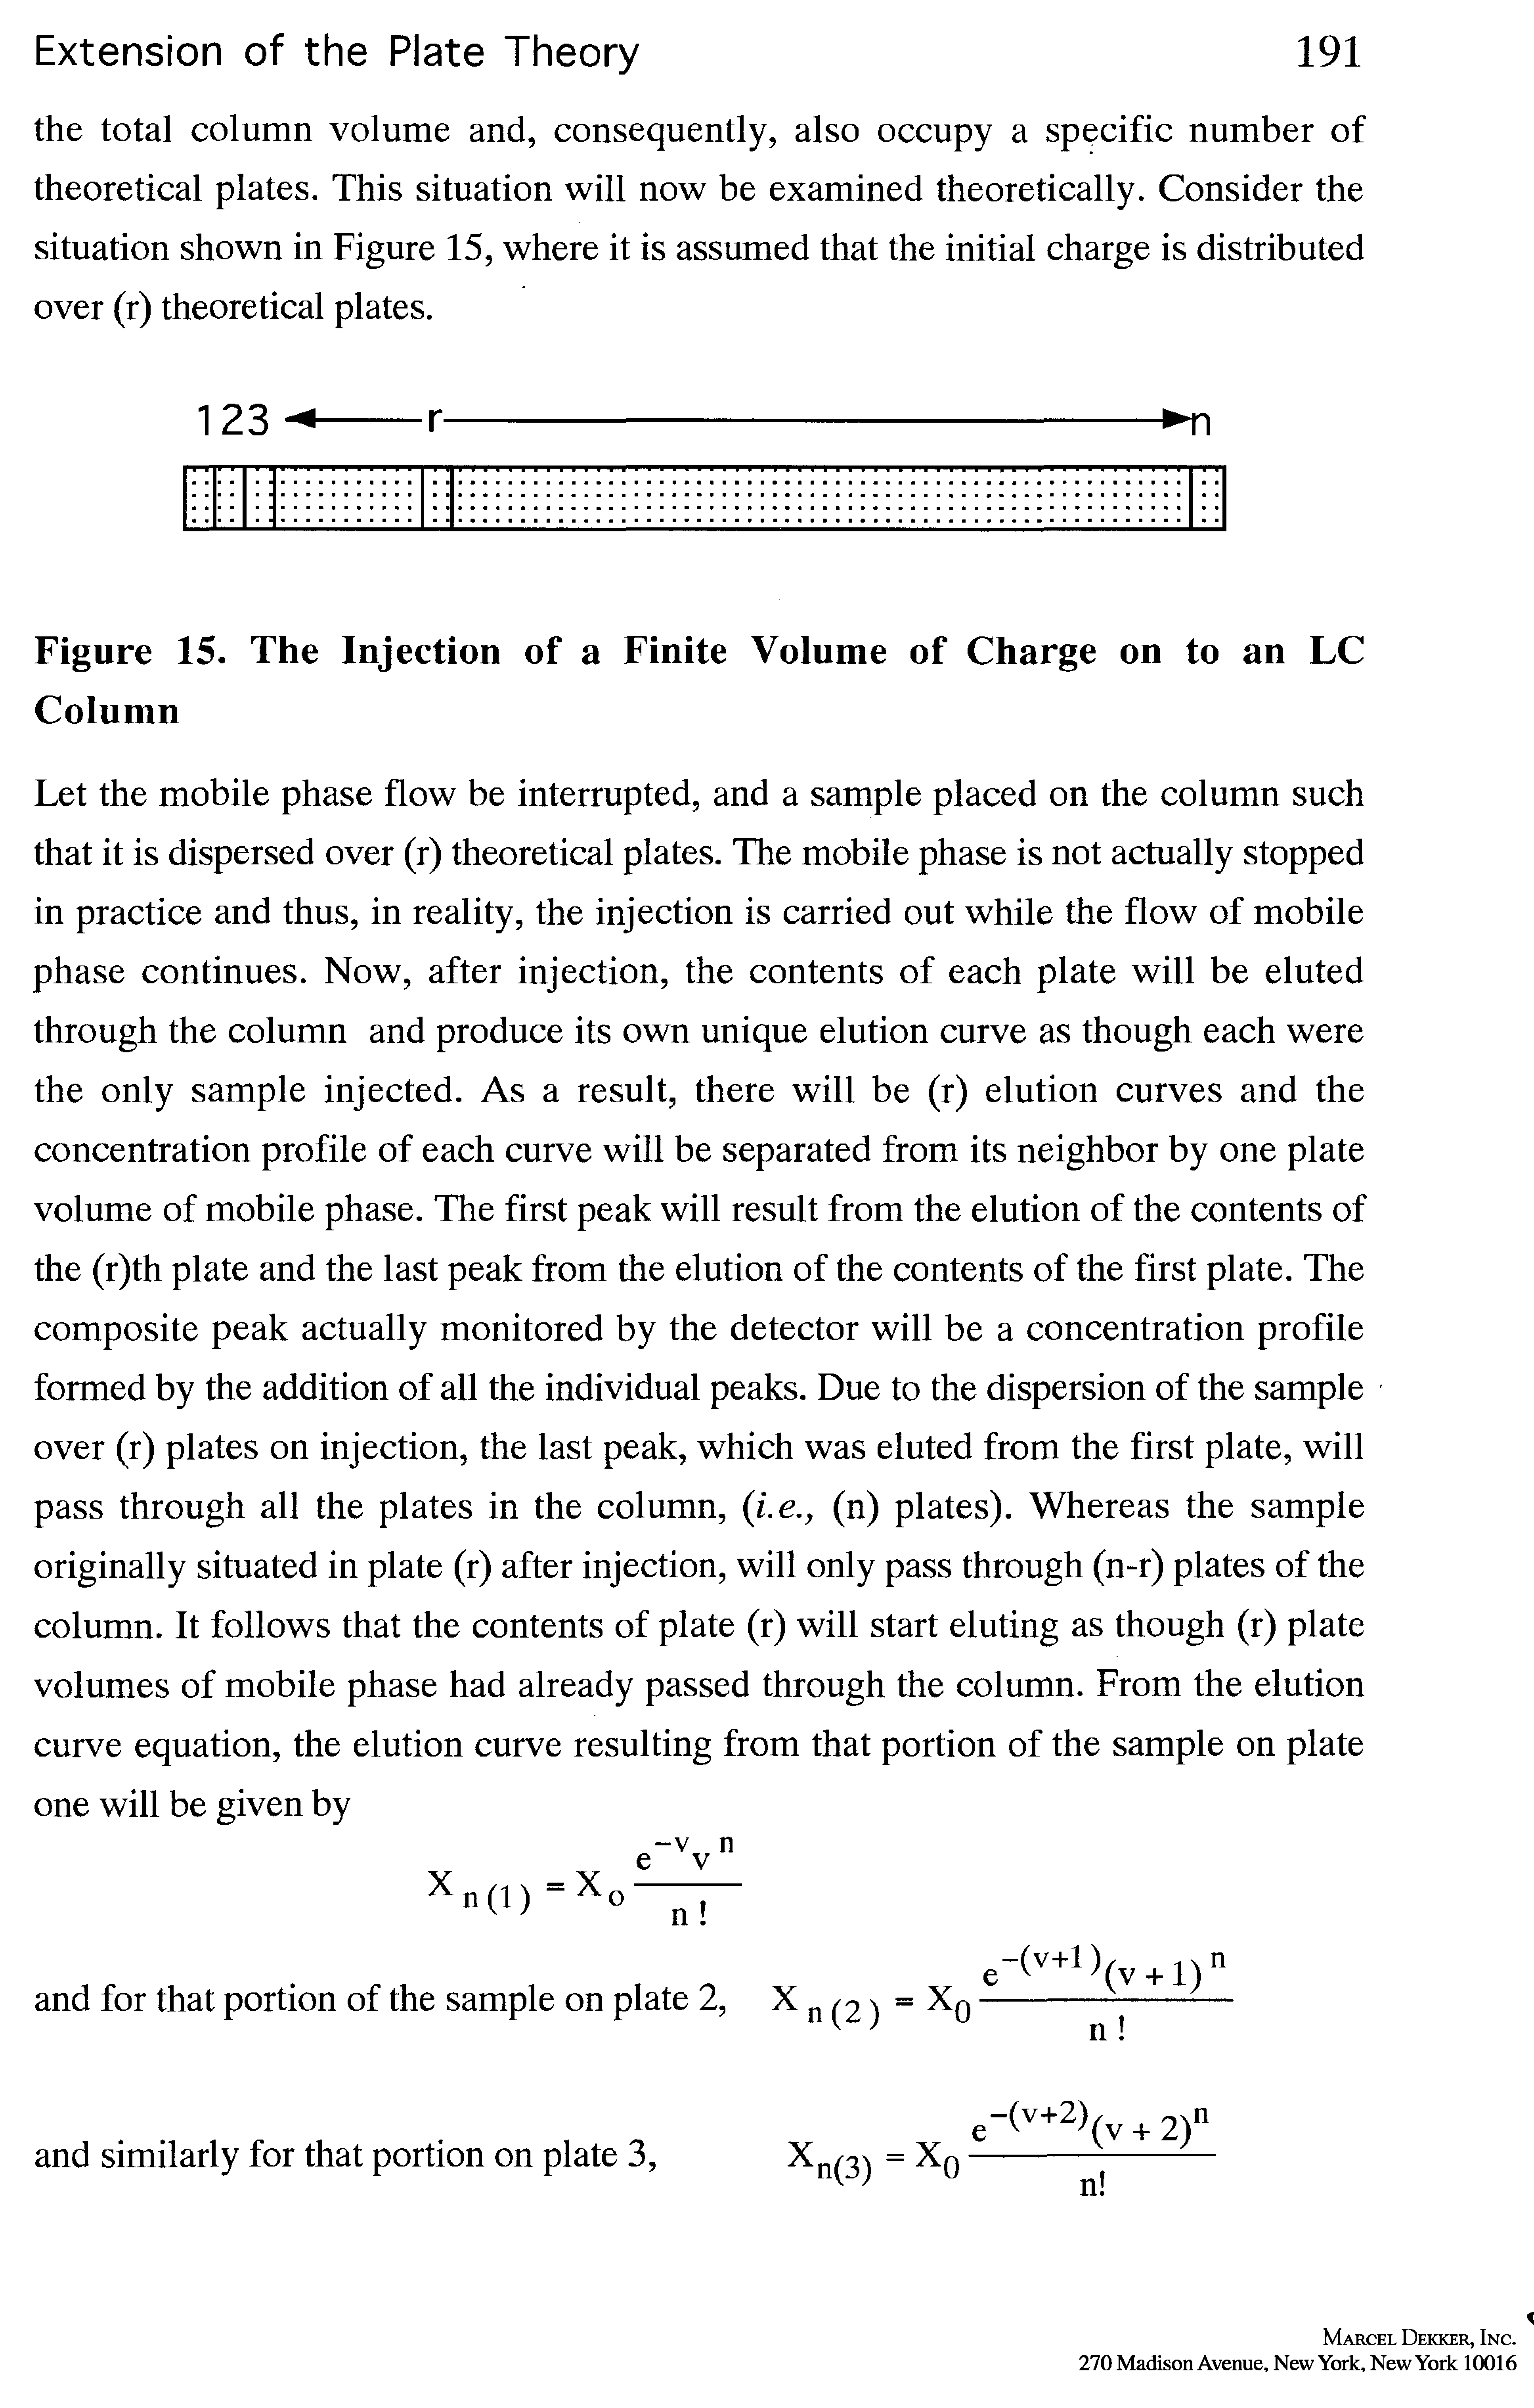 Figure 15. The Injection of a Finite Volume of Charge on to an LC Column...